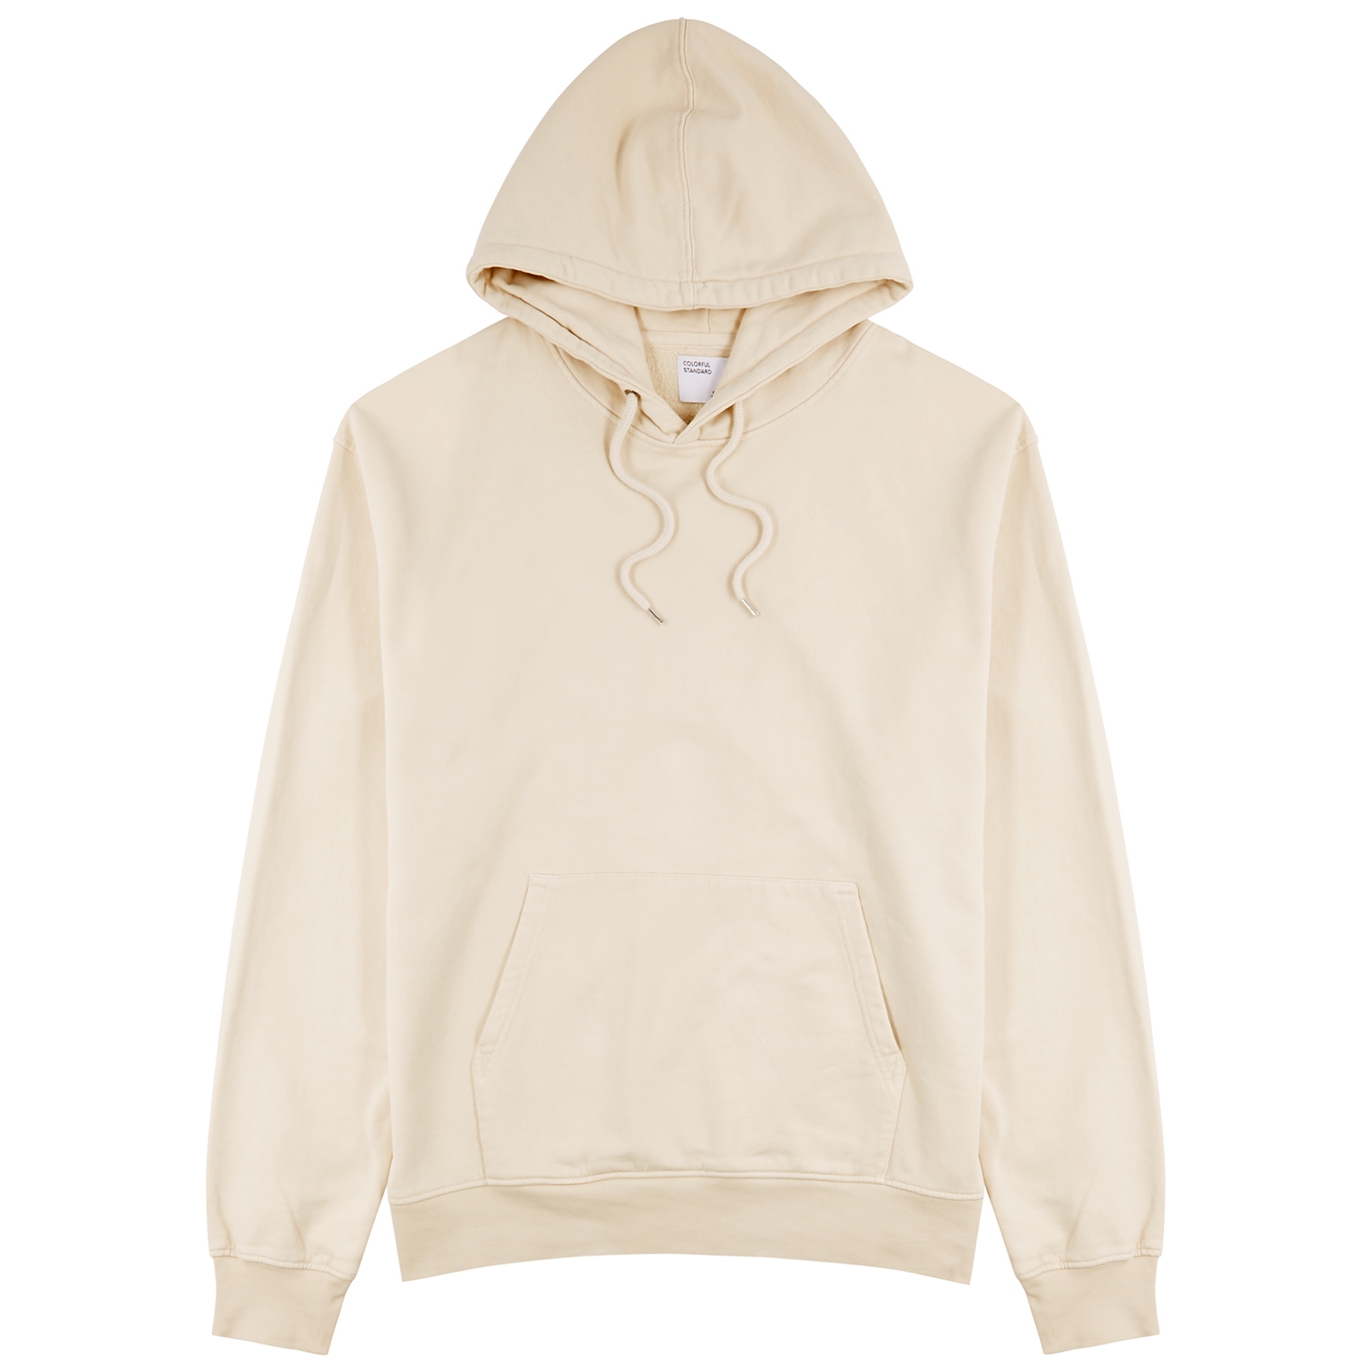 Colorful Standard Off-white Hooded Cotton Sweatshirt